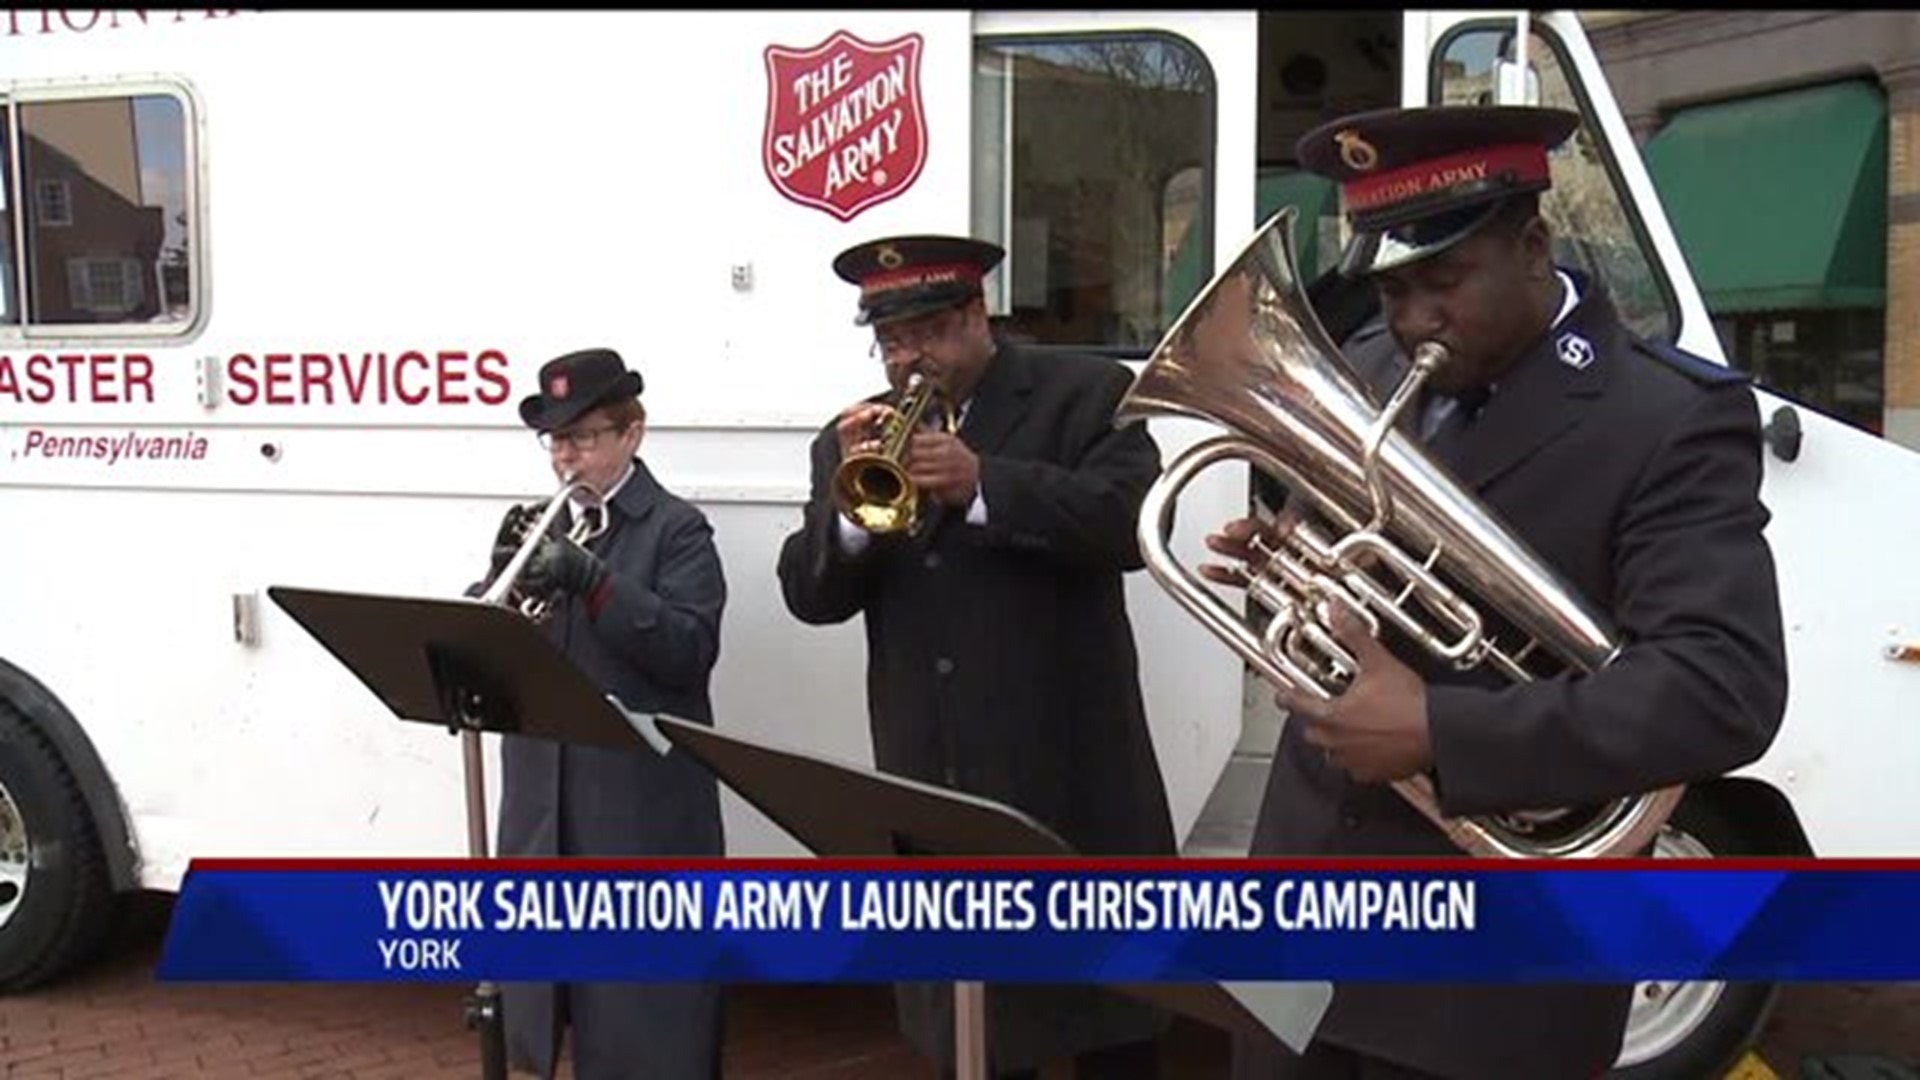 York Salvation Army Launches Christmas Campaign